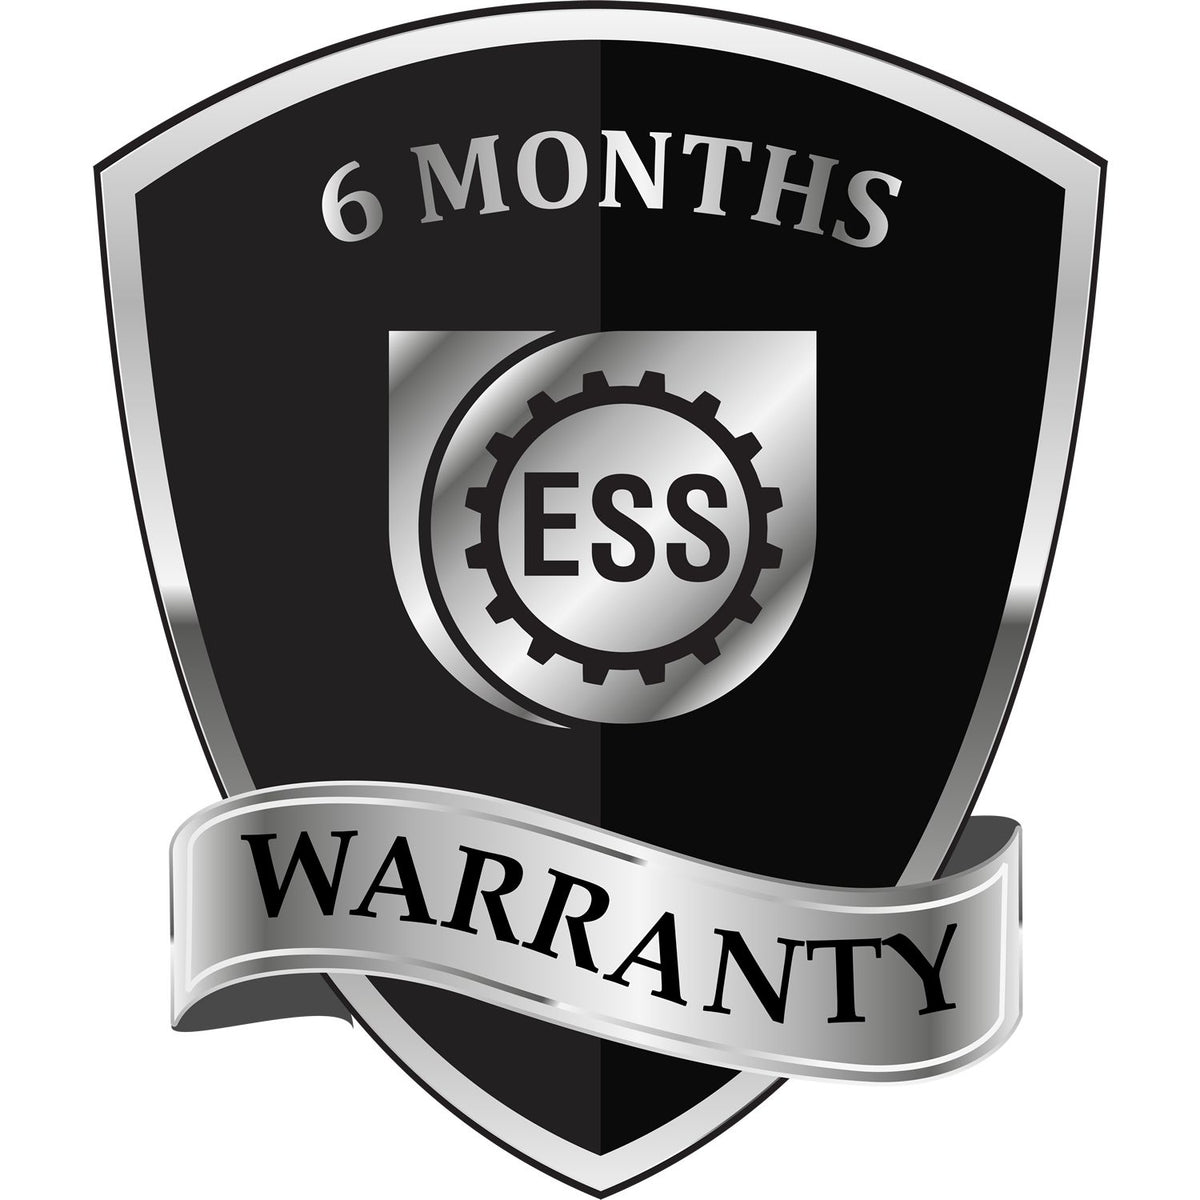 Large Narrow Void Rubber Stamp 5577R 6 Month Warranty